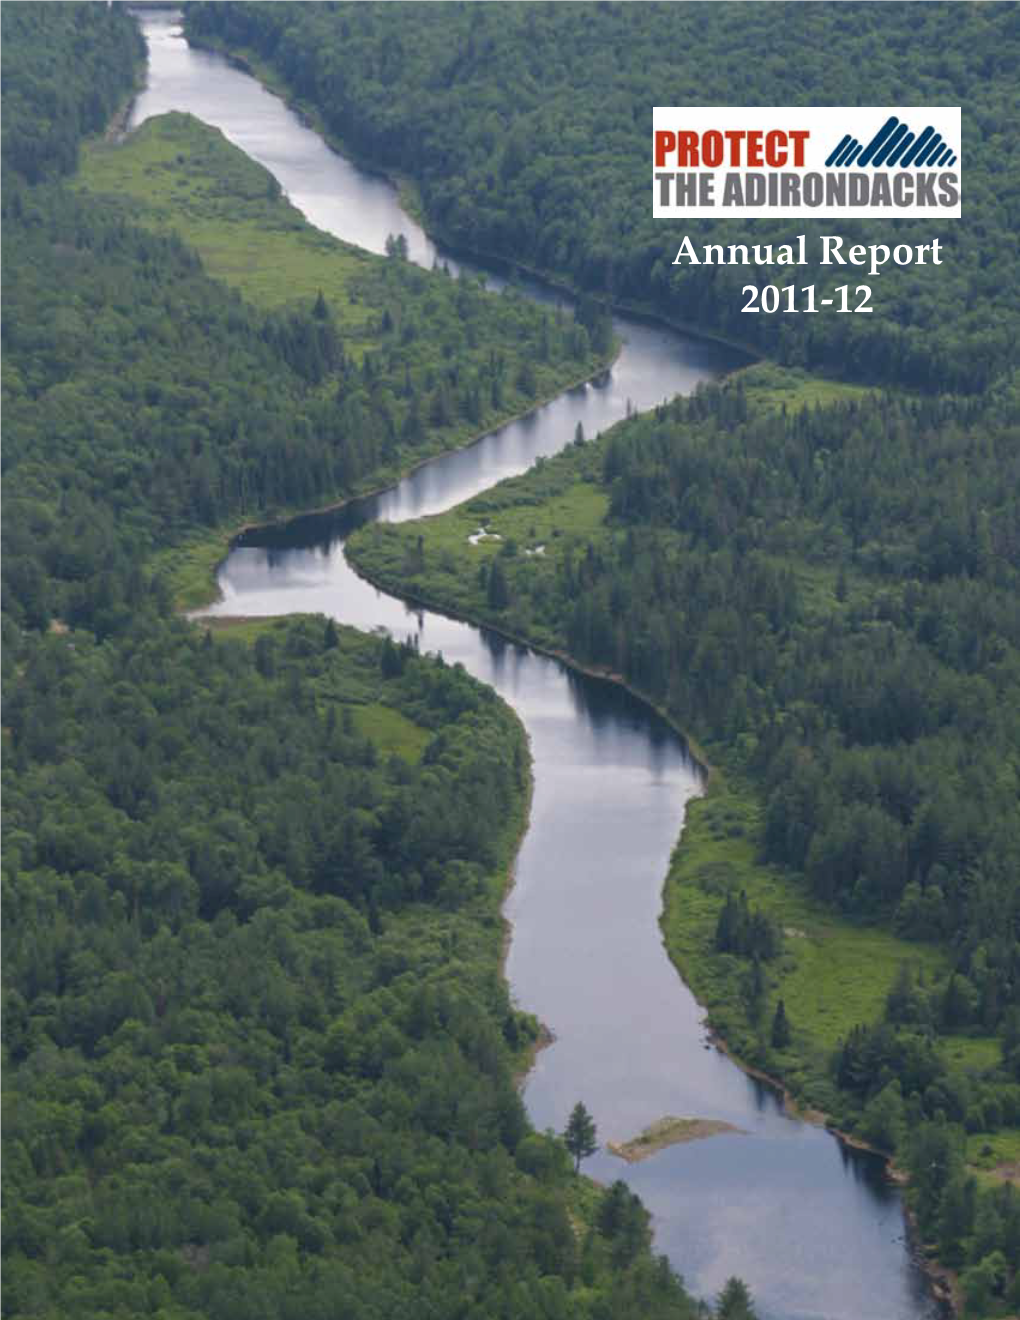 Annual Report 2011-12 Letter from Protect the Adirondacks